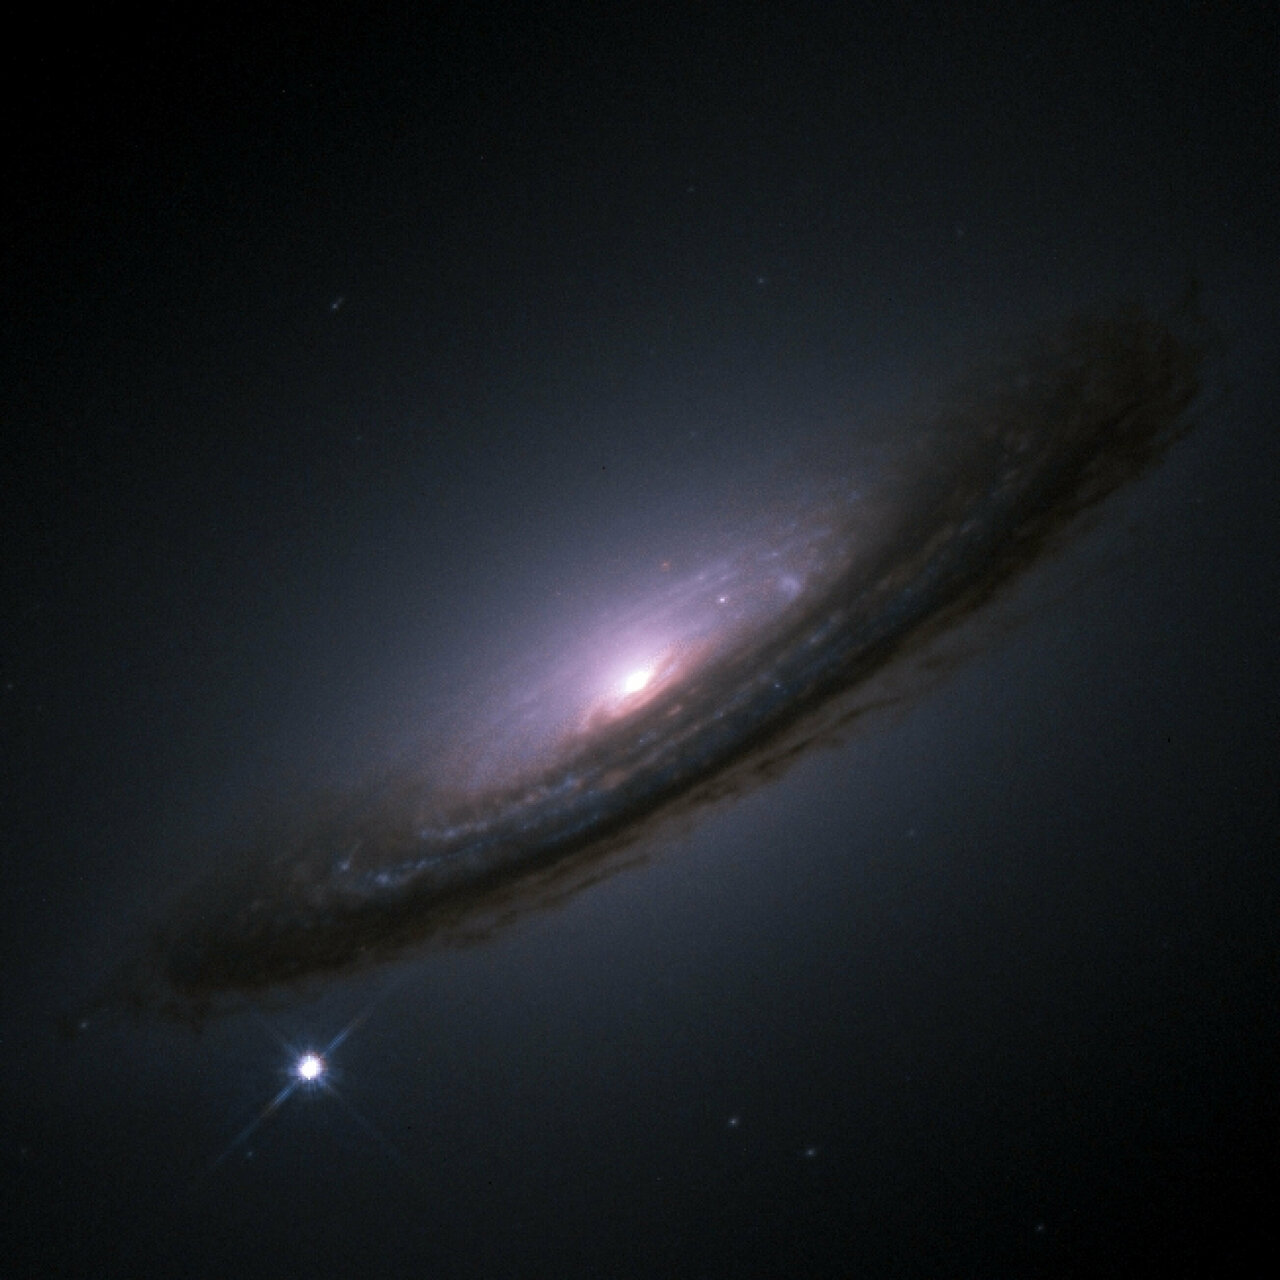 Astronomers Find Signatures Of A Messy Star That Made Its Companion Go Supernova